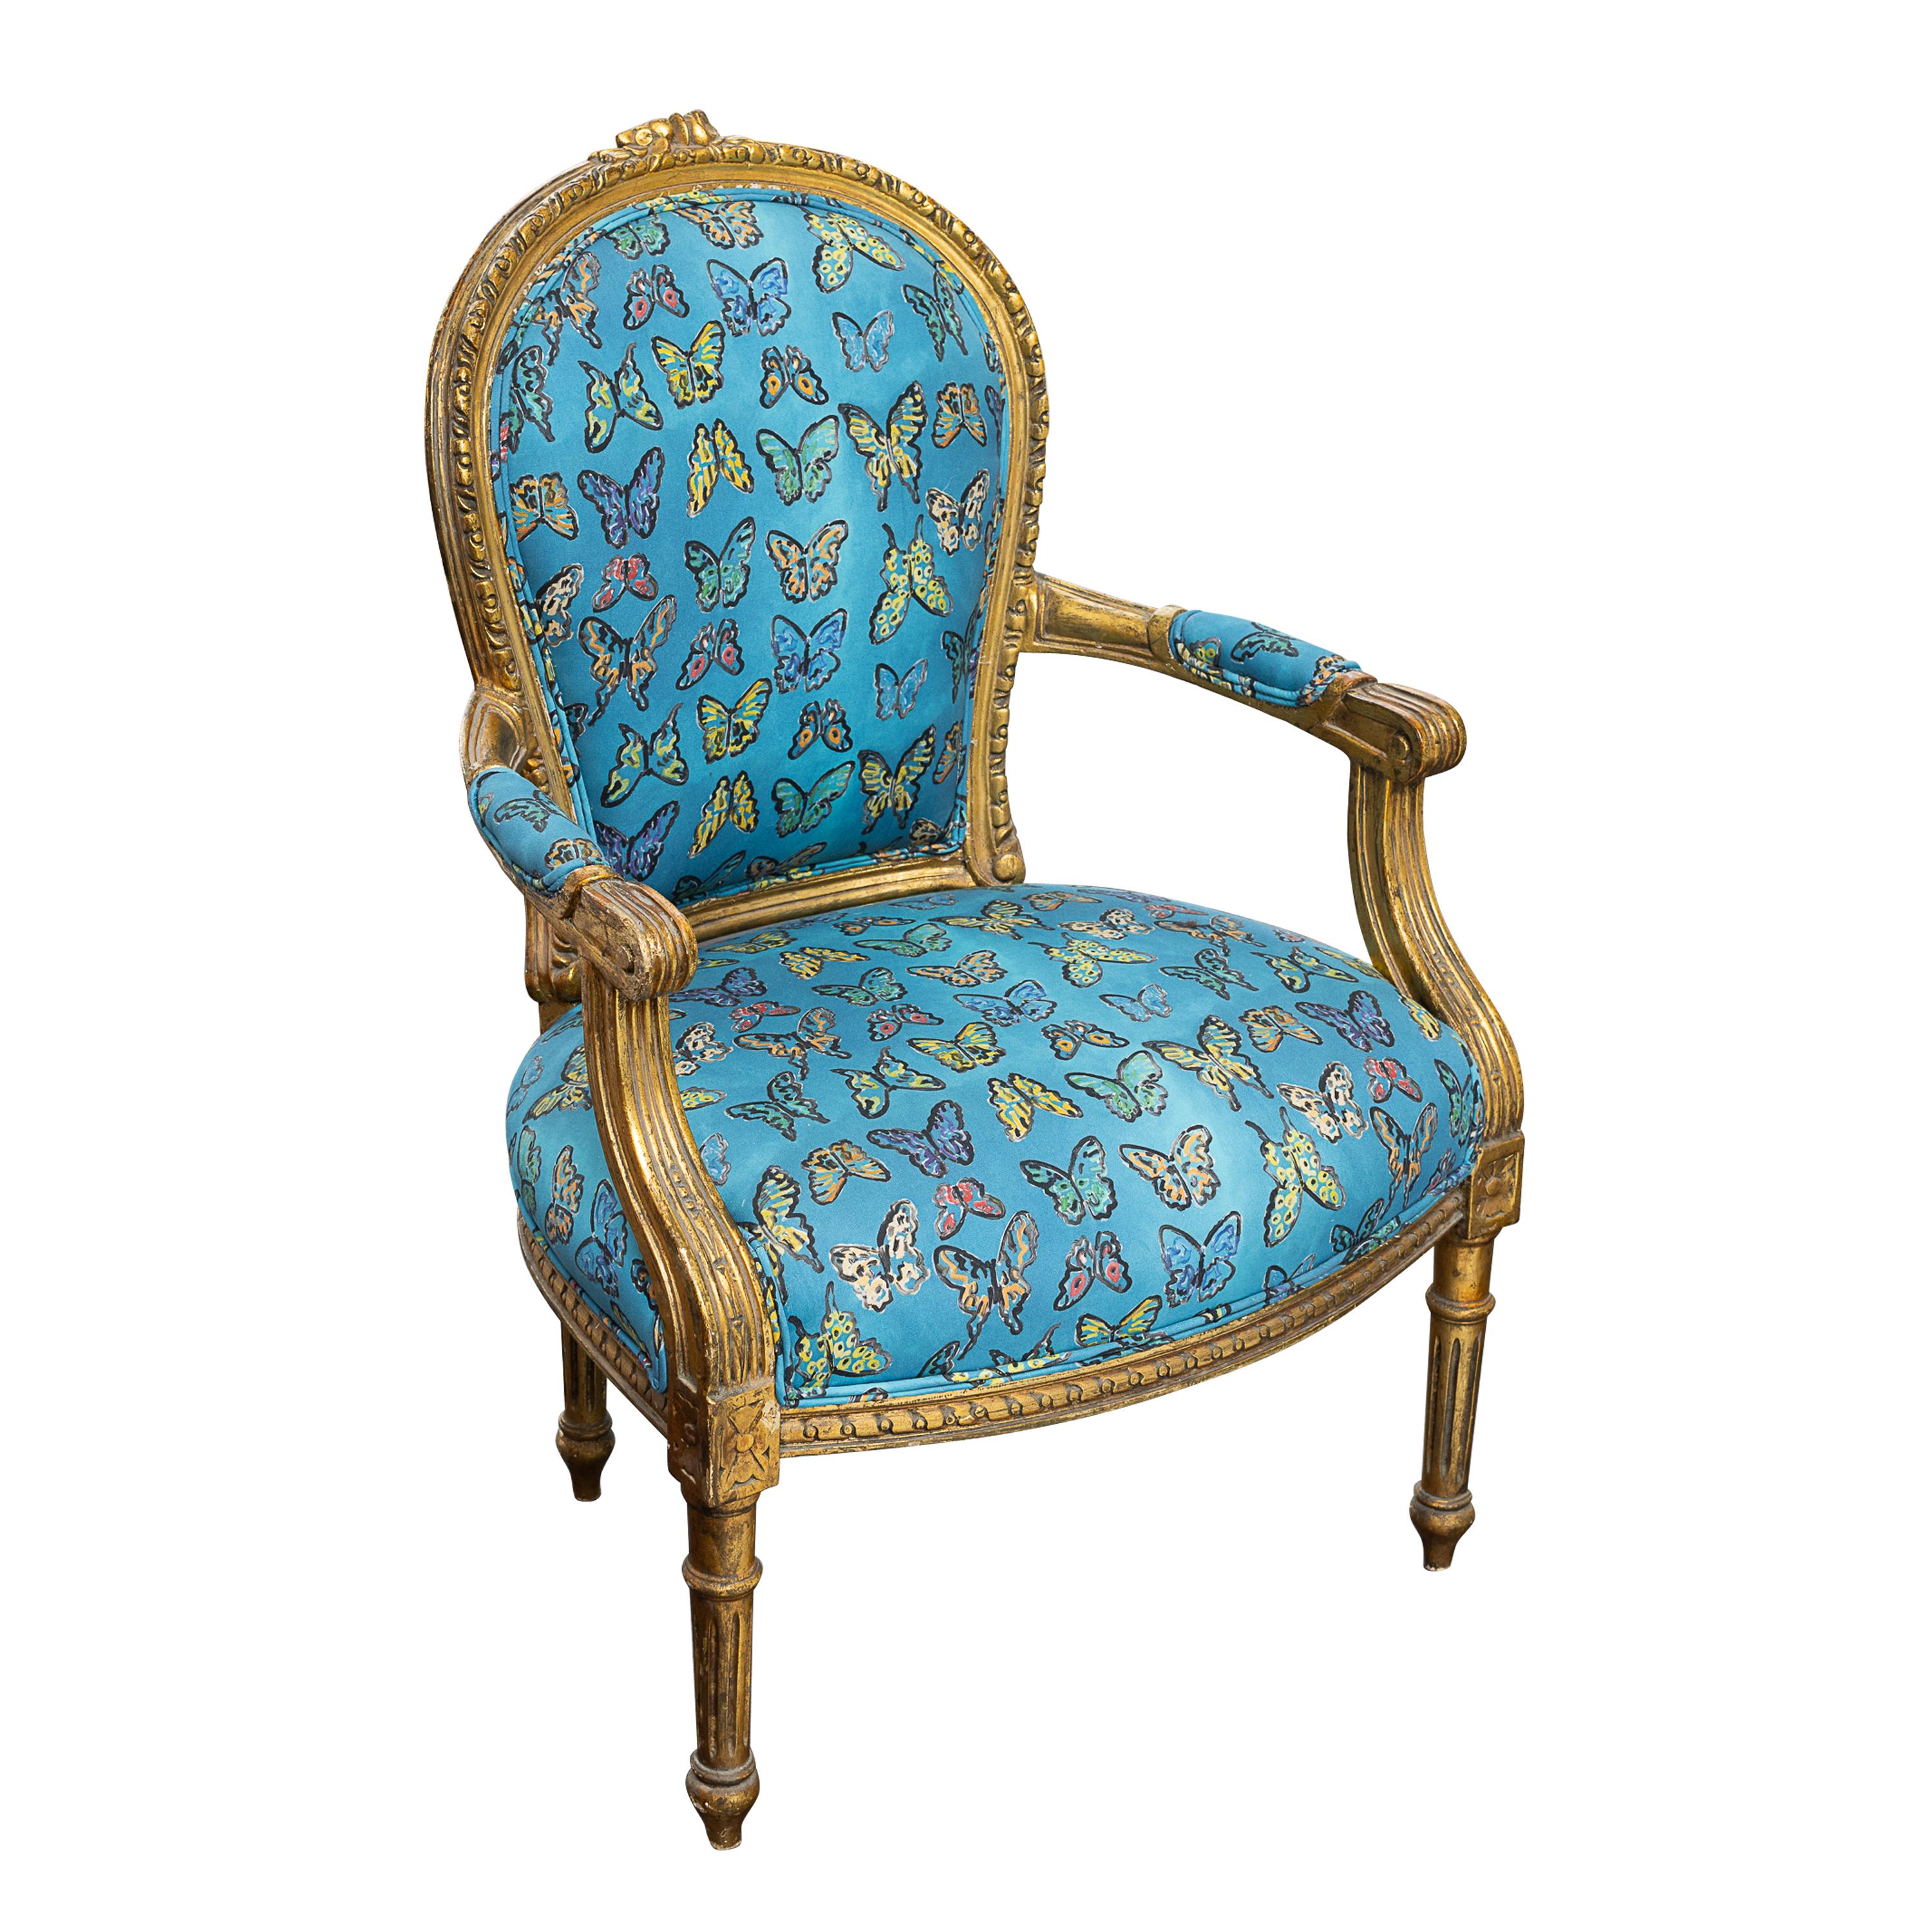 Gold Leaf Pair of 19th Century Louis XV Style Balloon Back Slipper Chairs, Hunt Slonem